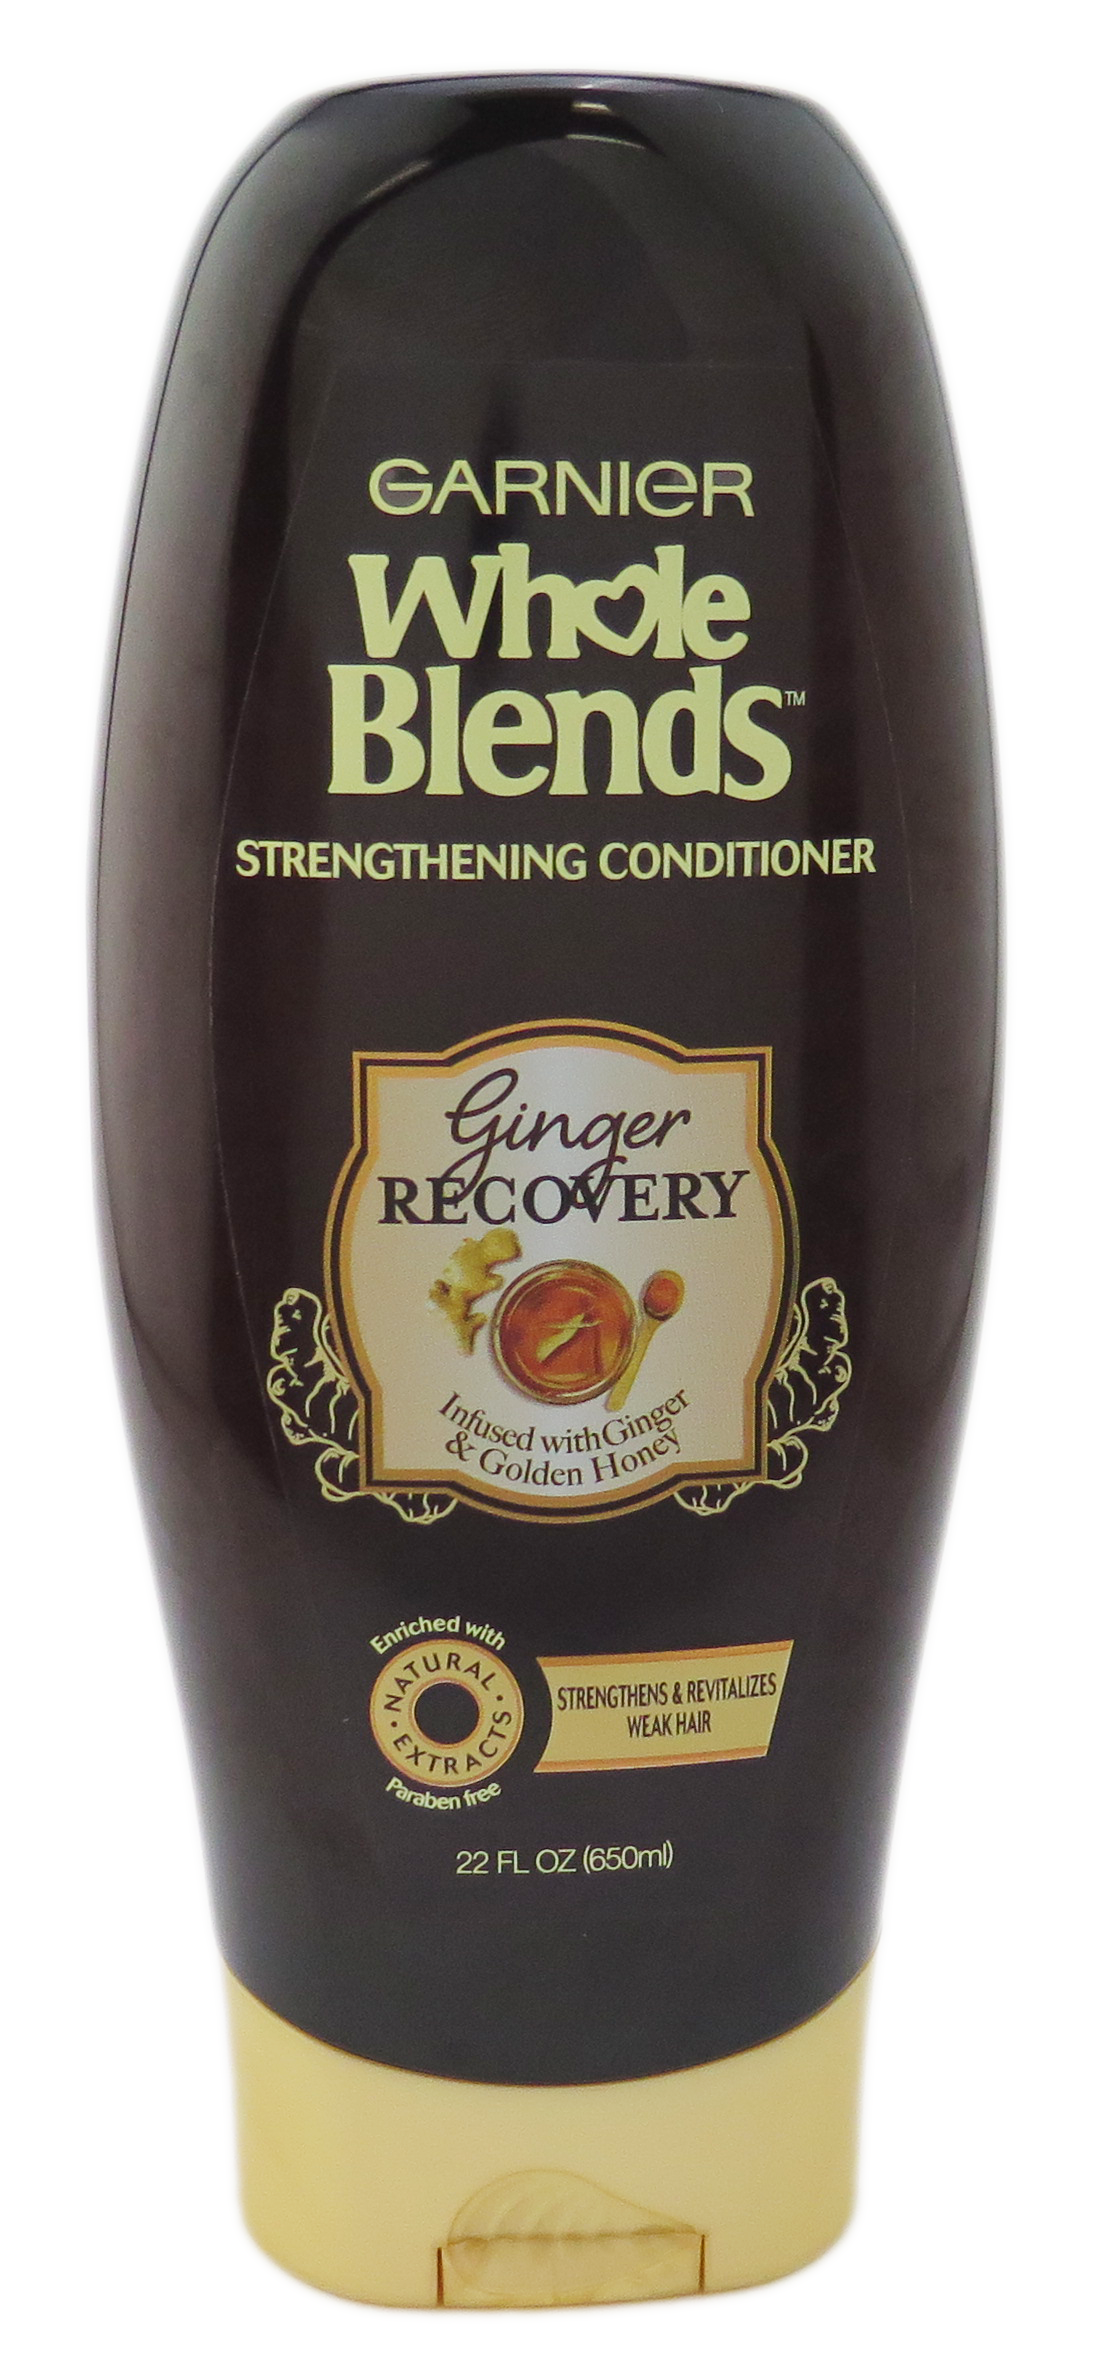 Garnier Whole Blends Ginger Recovery Strengthening Conditioner 22 fl oz